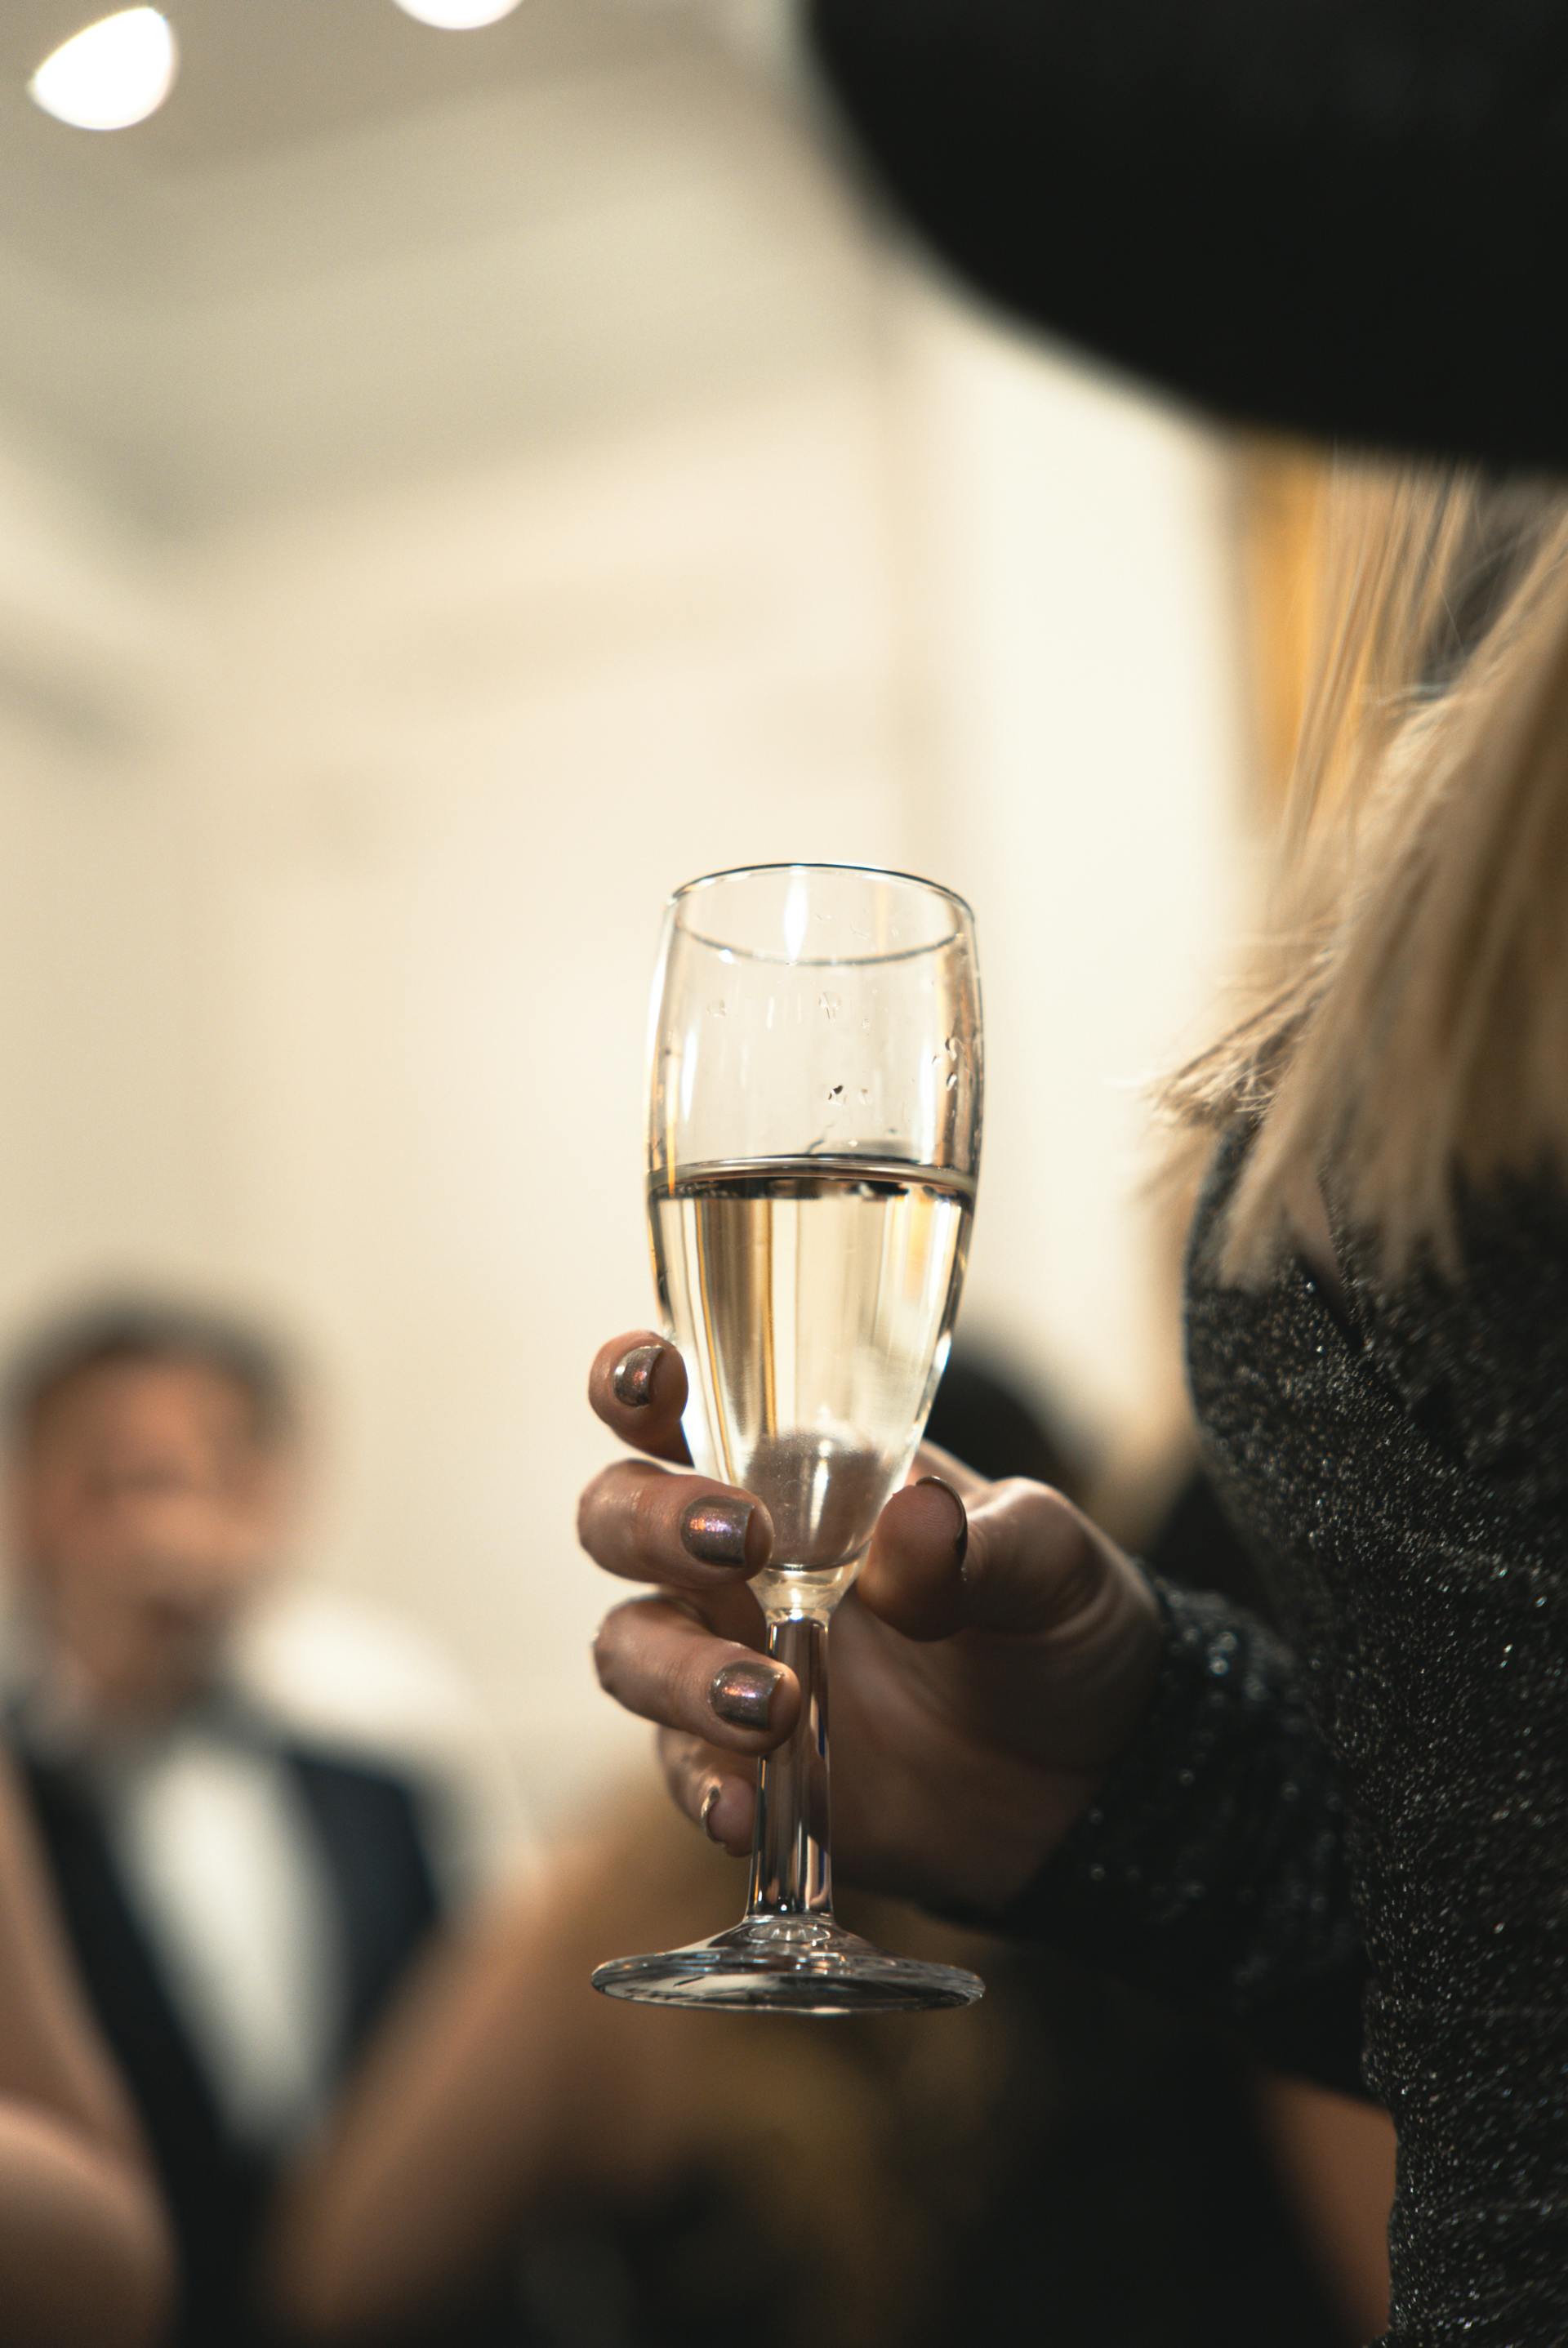 A woman holding a glass of champagne | Source: Pexels